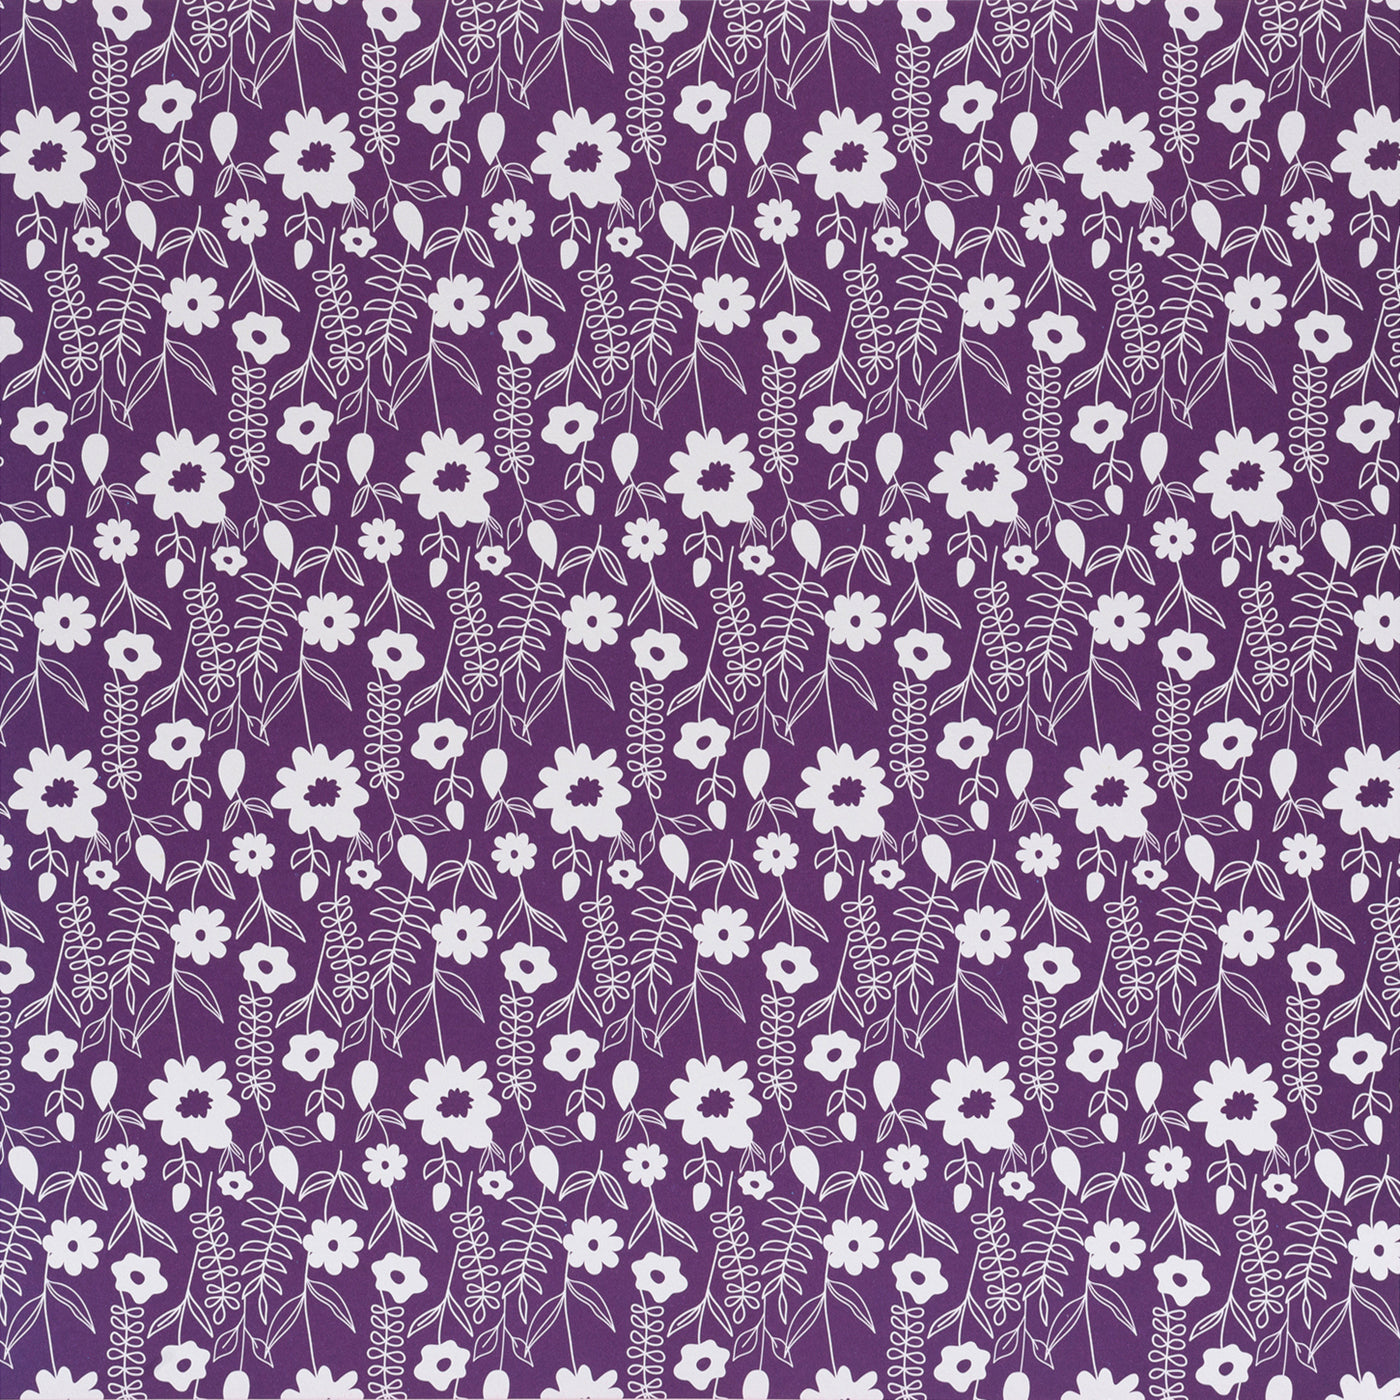 Purple Floral - 12x12 Double-Sided Patterned Paper - Dcwv